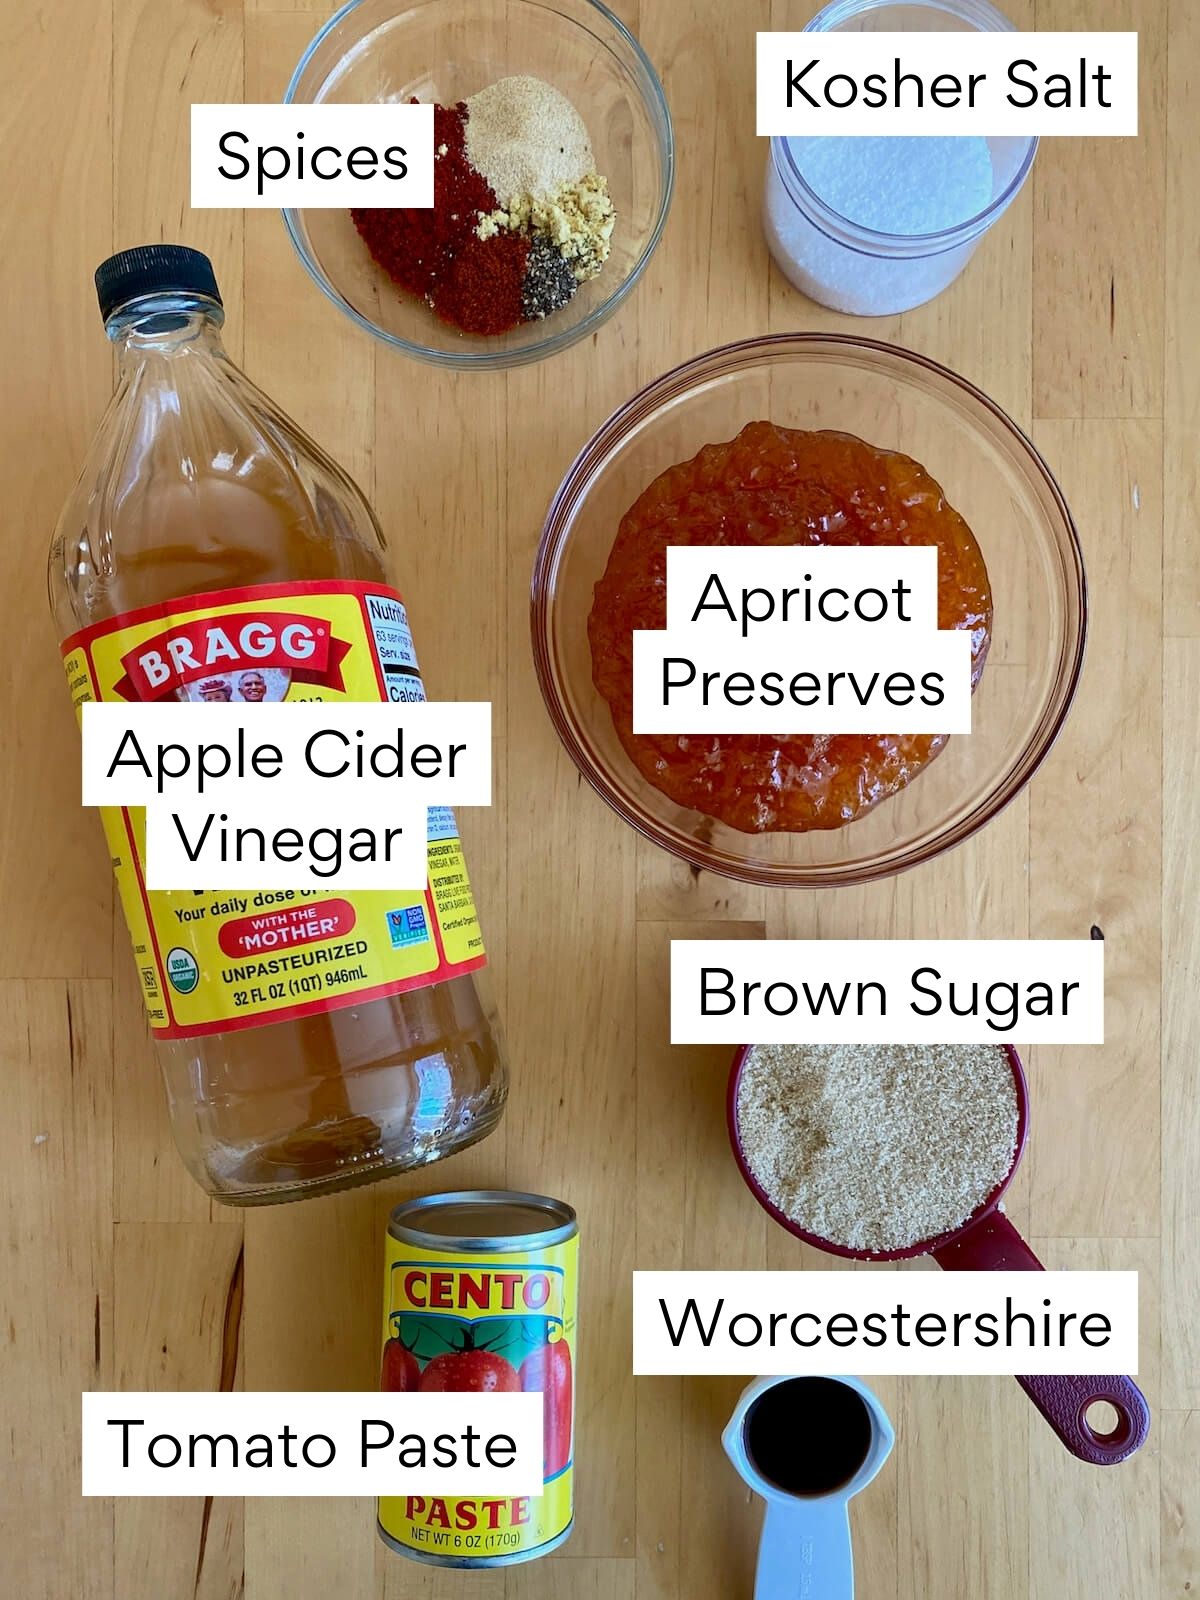 The ingredients to make apricot bbq sauce. Each ingredient is labeled with text. They include spices, kosher salt, apple cider vinegar, apricot preserves, brown sugar, tomato paste, and Worcestershire sauce.